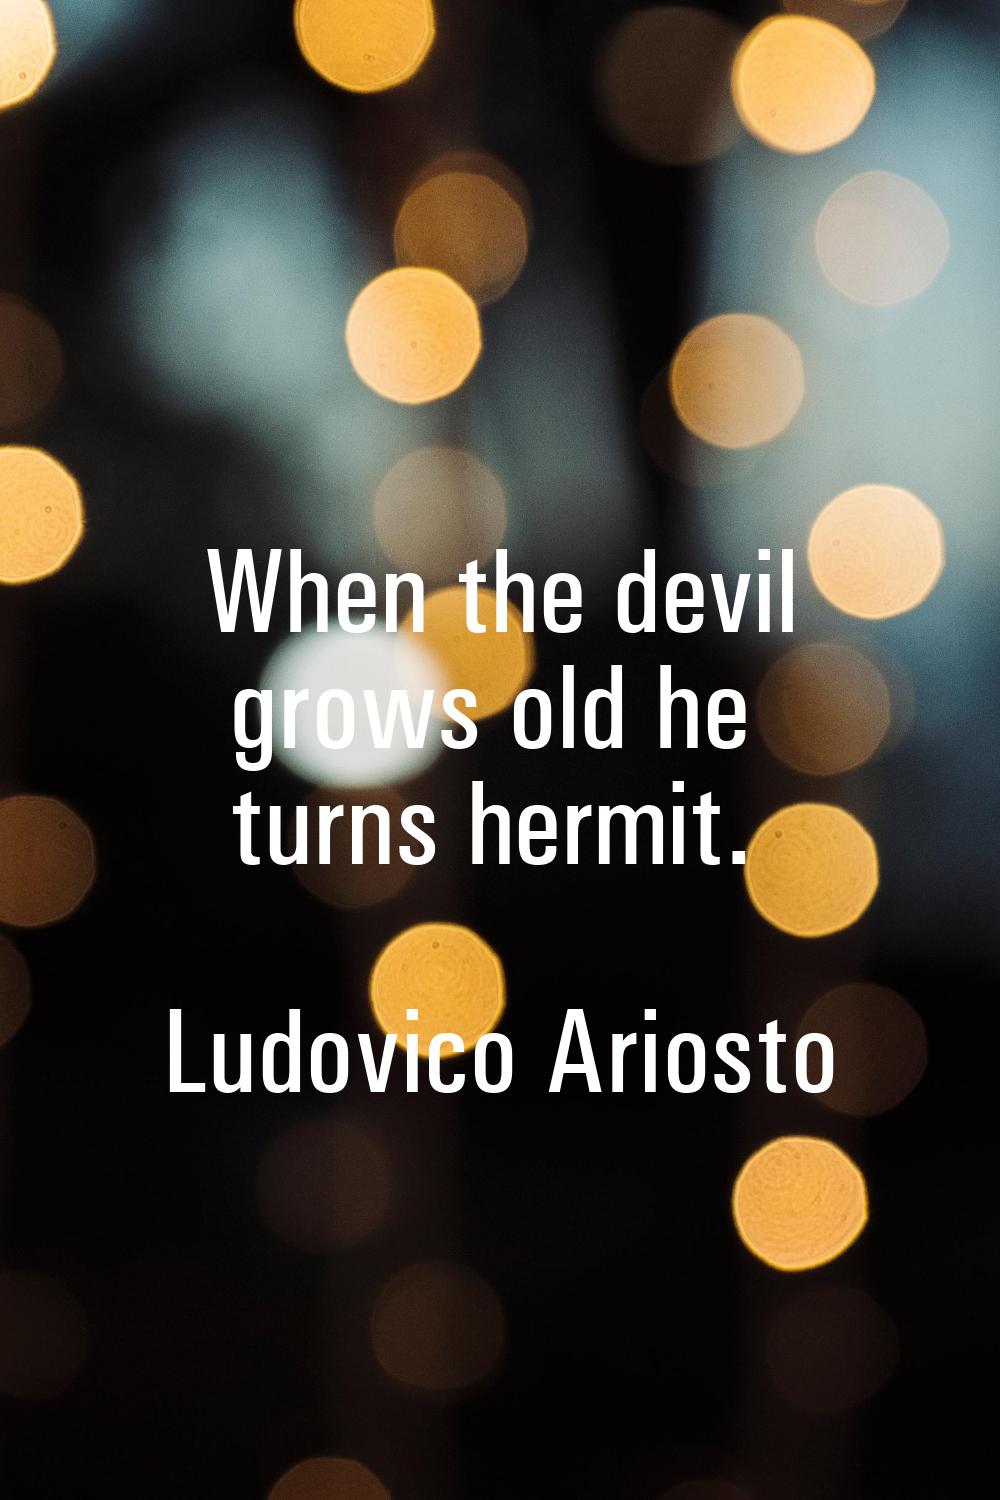 When the devil grows old he turns hermit.